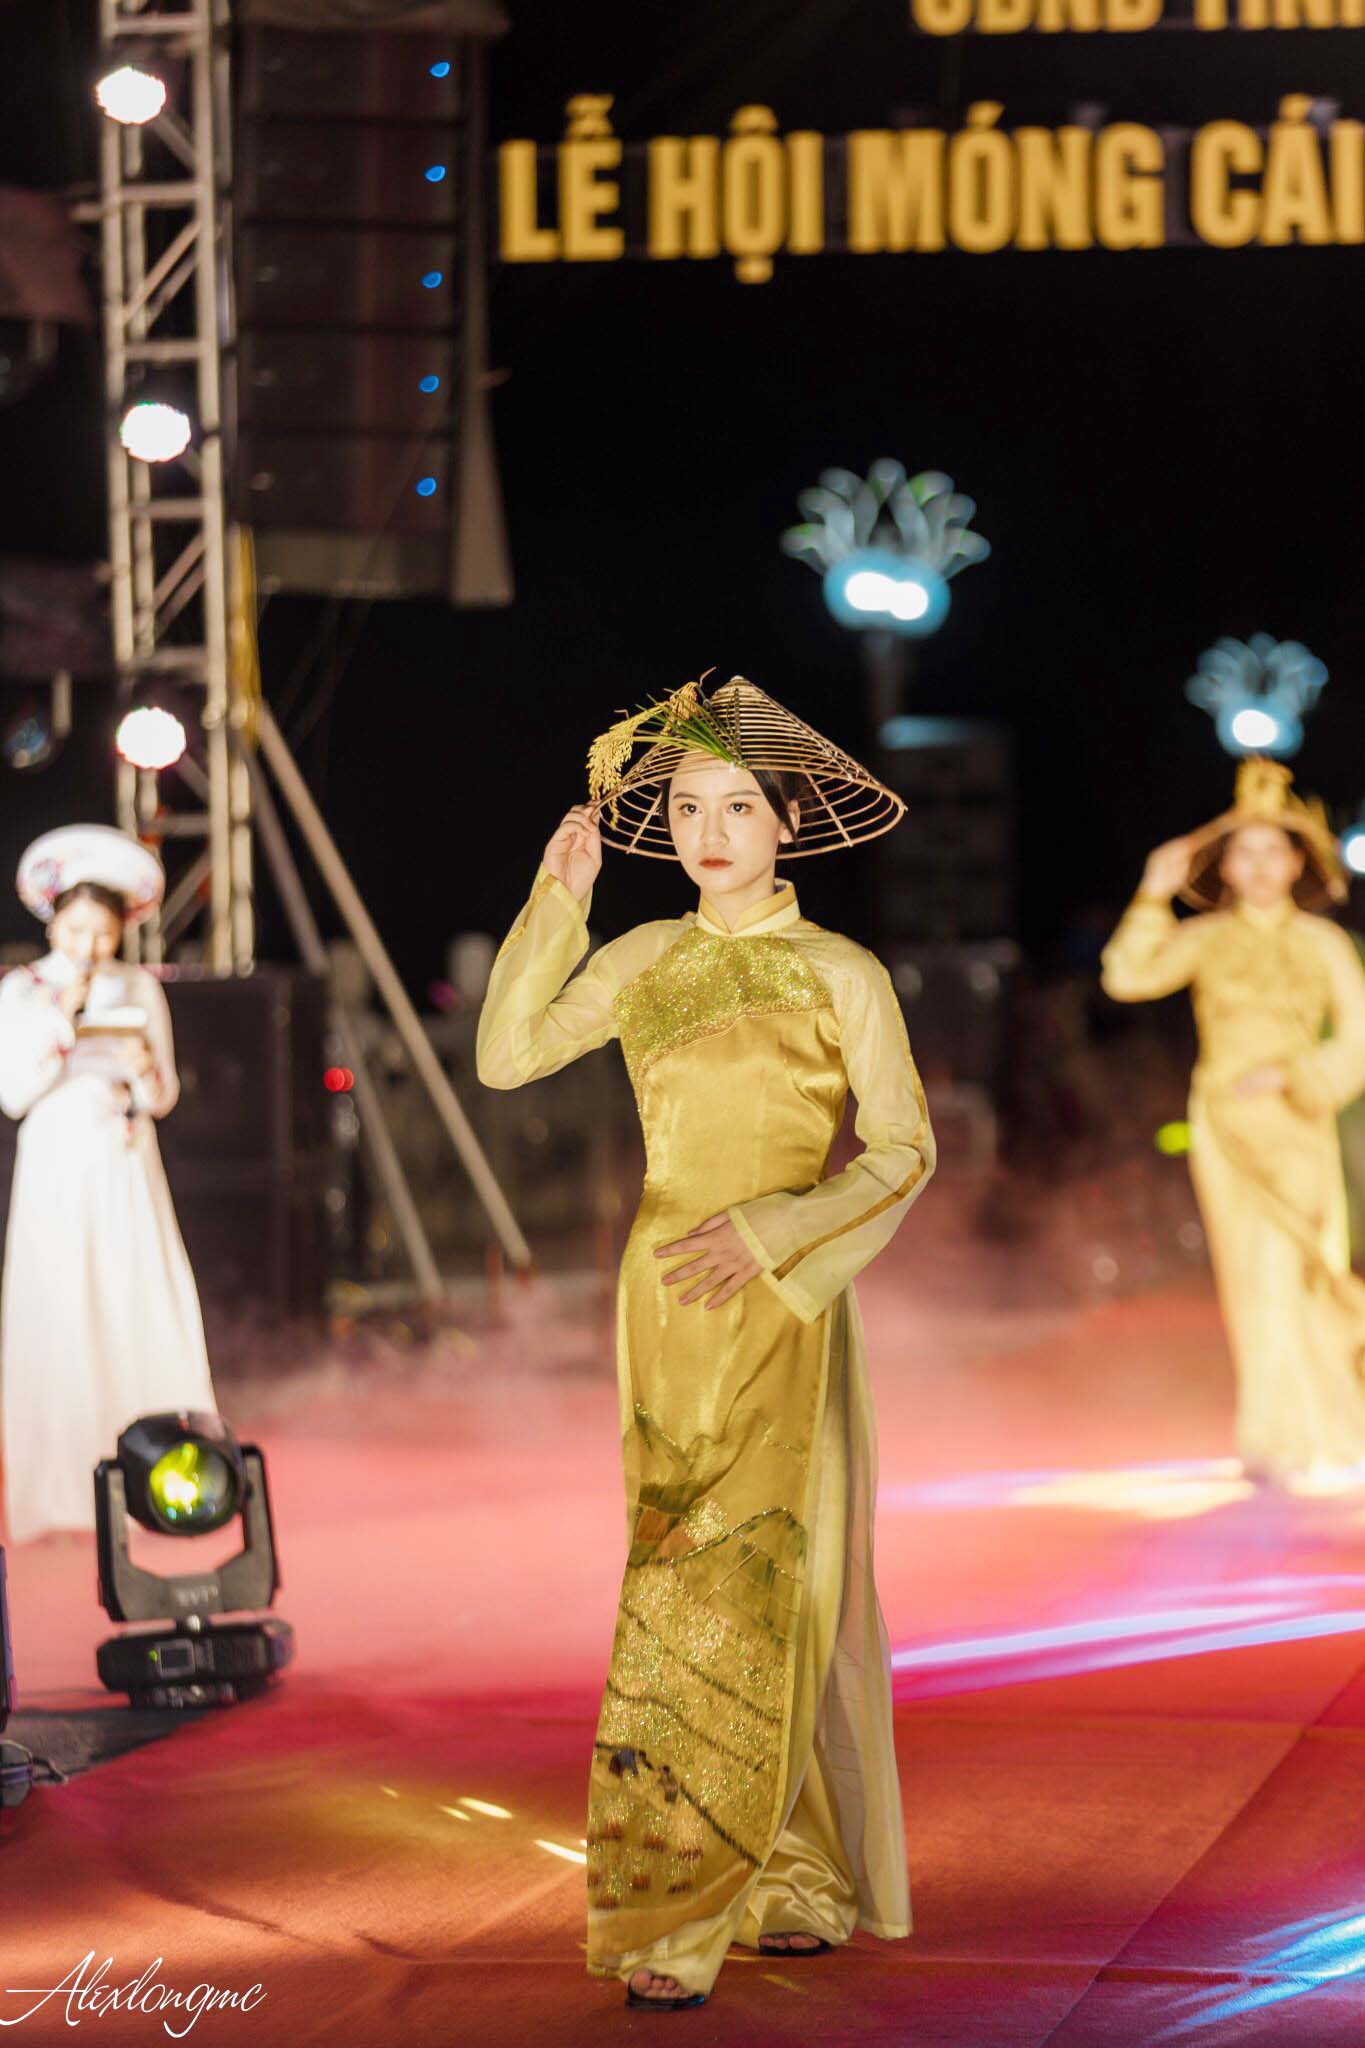 Ngan An Ao Dai shimmers on the night of the summer 2022 Mong Cai Festival - Photo 2.